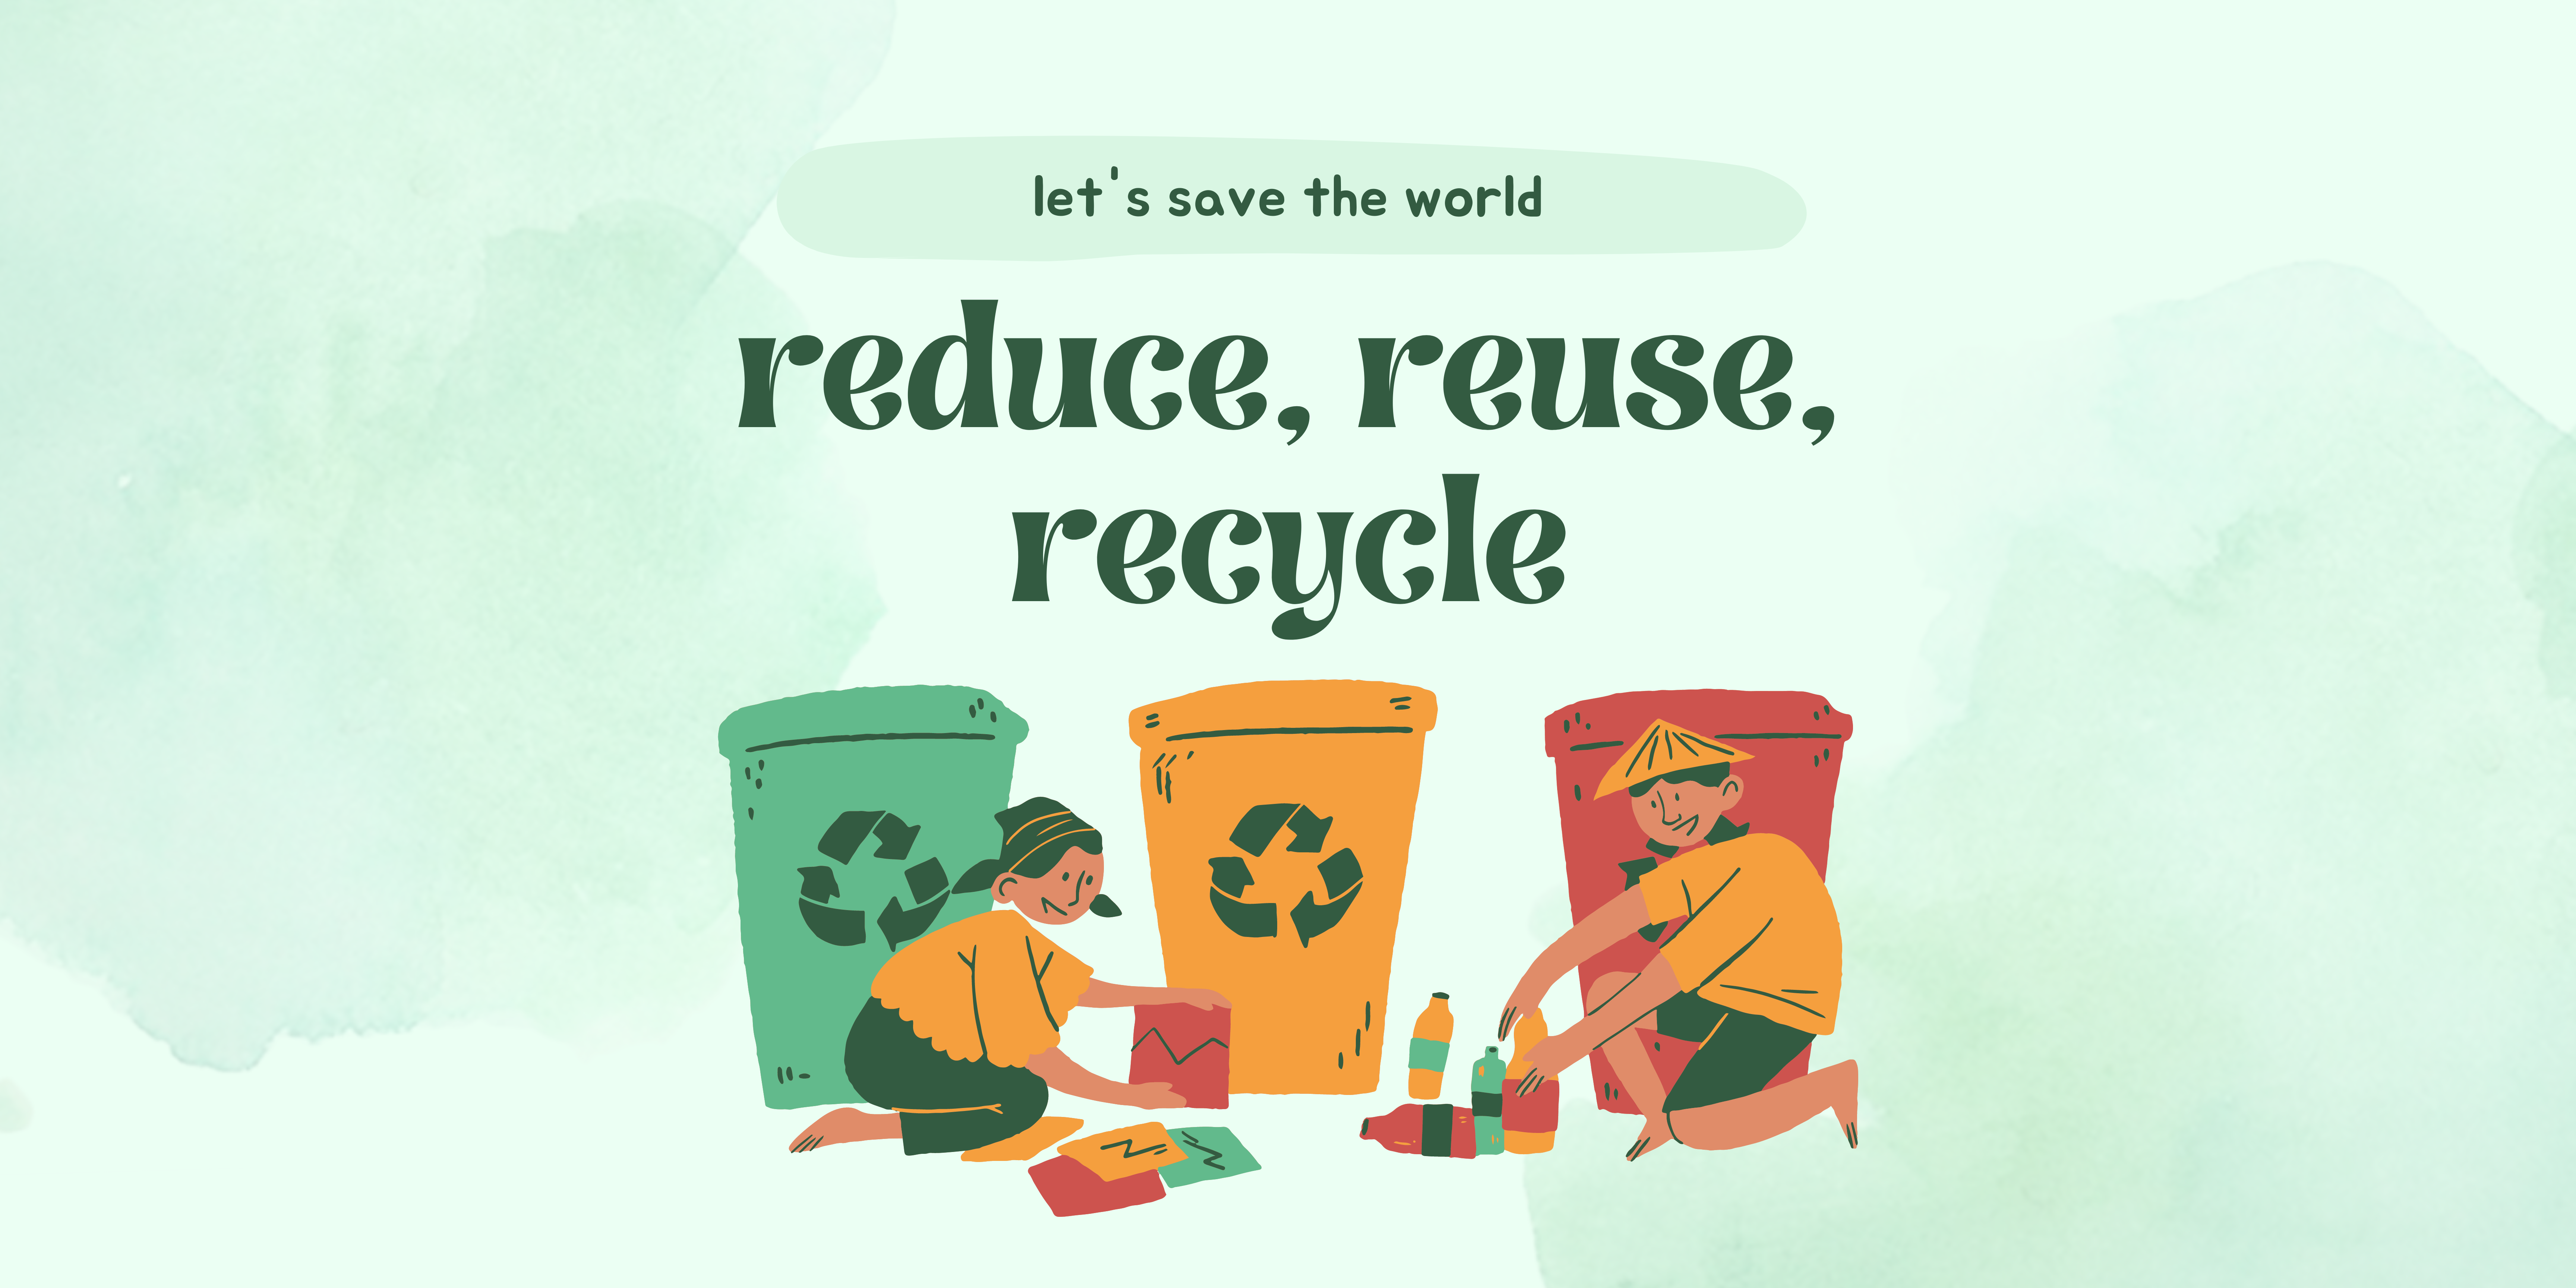 Best Way to Reduce Reuse Recycle and Save Environment